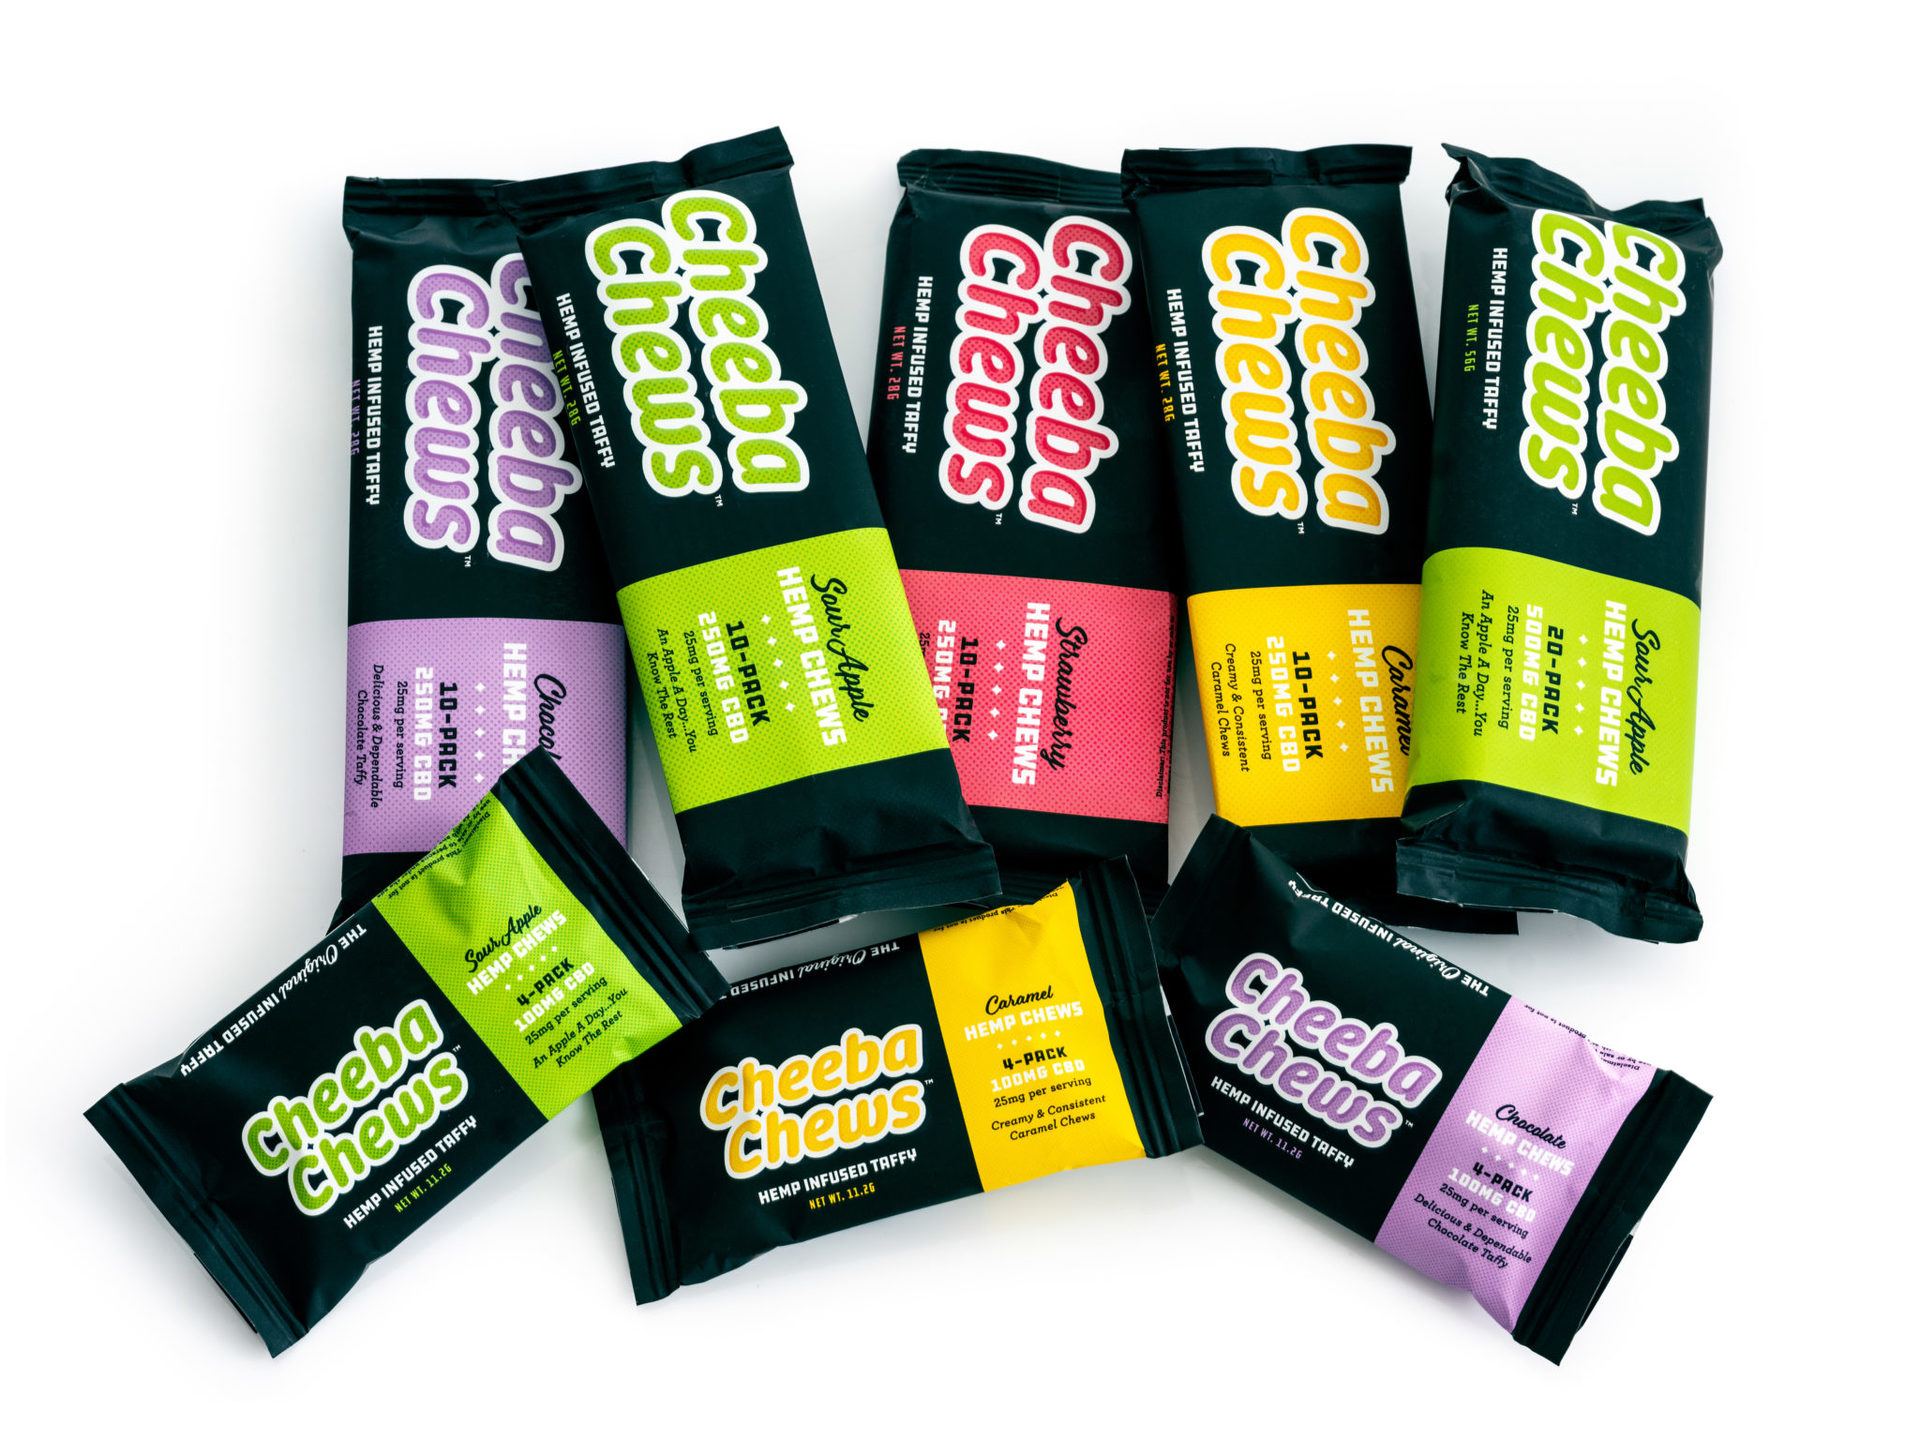 After years of success with their signature THC-infused taffy, Cheeba Chews branched out this week with the launch of their CBD chews. Photo: A collection of Cheeba Chews hemp products in various flavors.